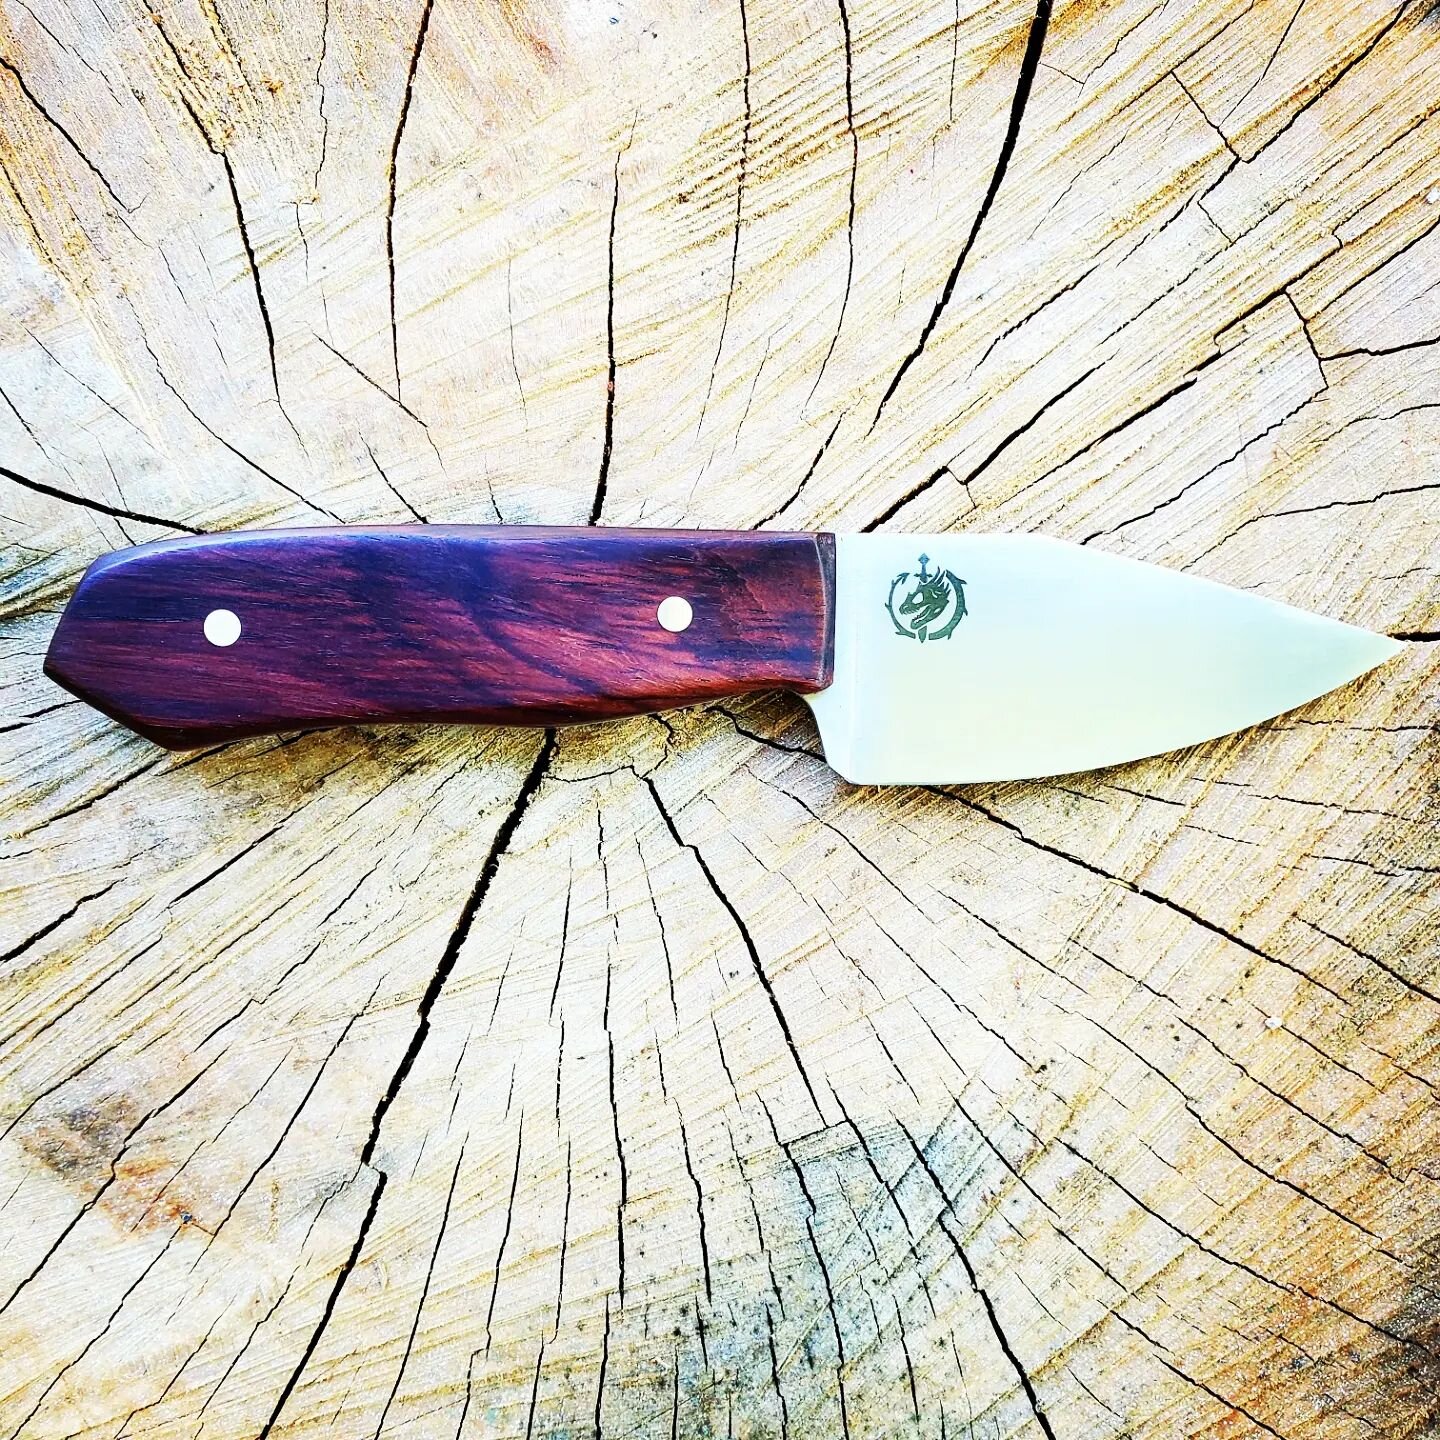 &quot;You can't go back and change the beginning, but you can start where you are and change the ending.&quot;- C.S Lewis.

Available. 52100, cocobolo, Tiffany Blue G10.

Your story isn't over.